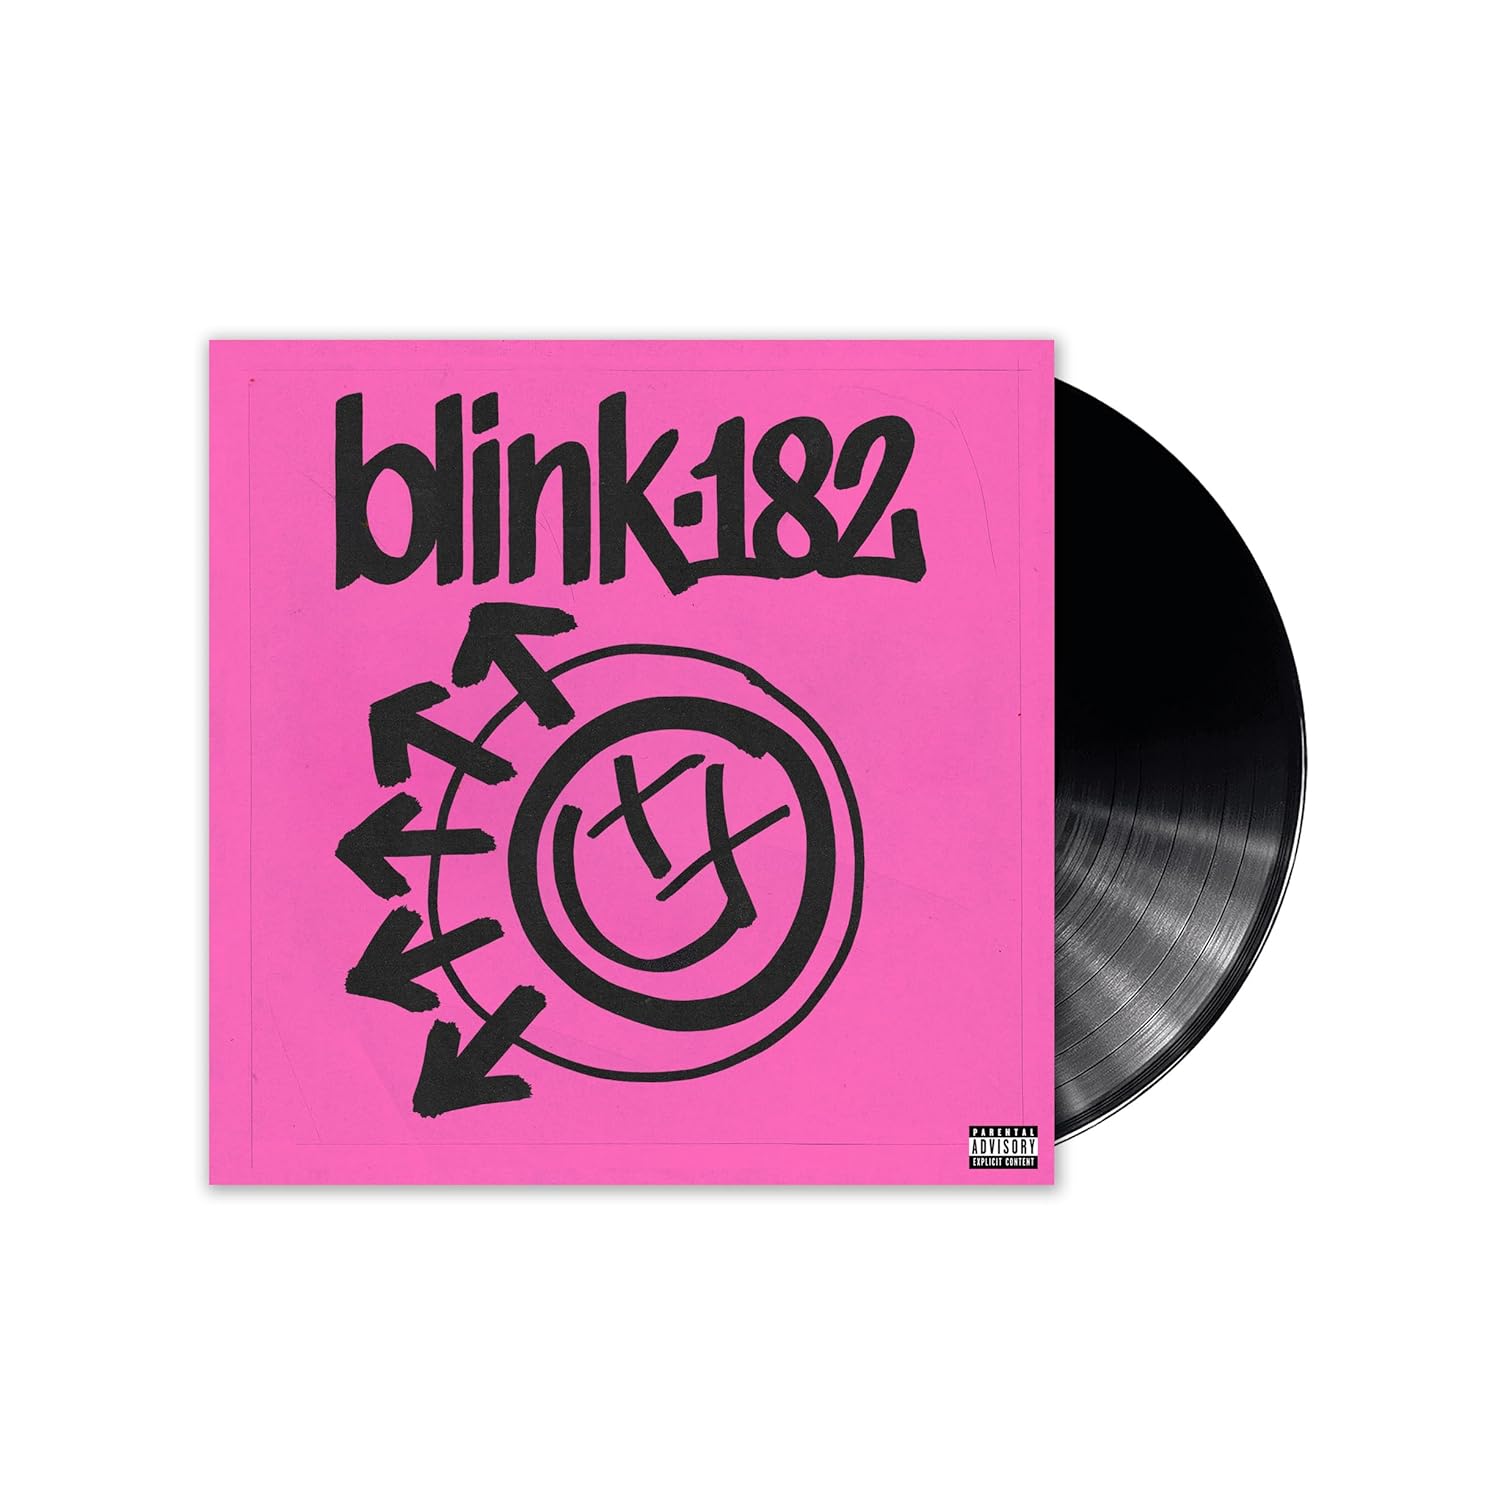 blink-182 (블링크-182) - ONE MORE TIME... [LP]